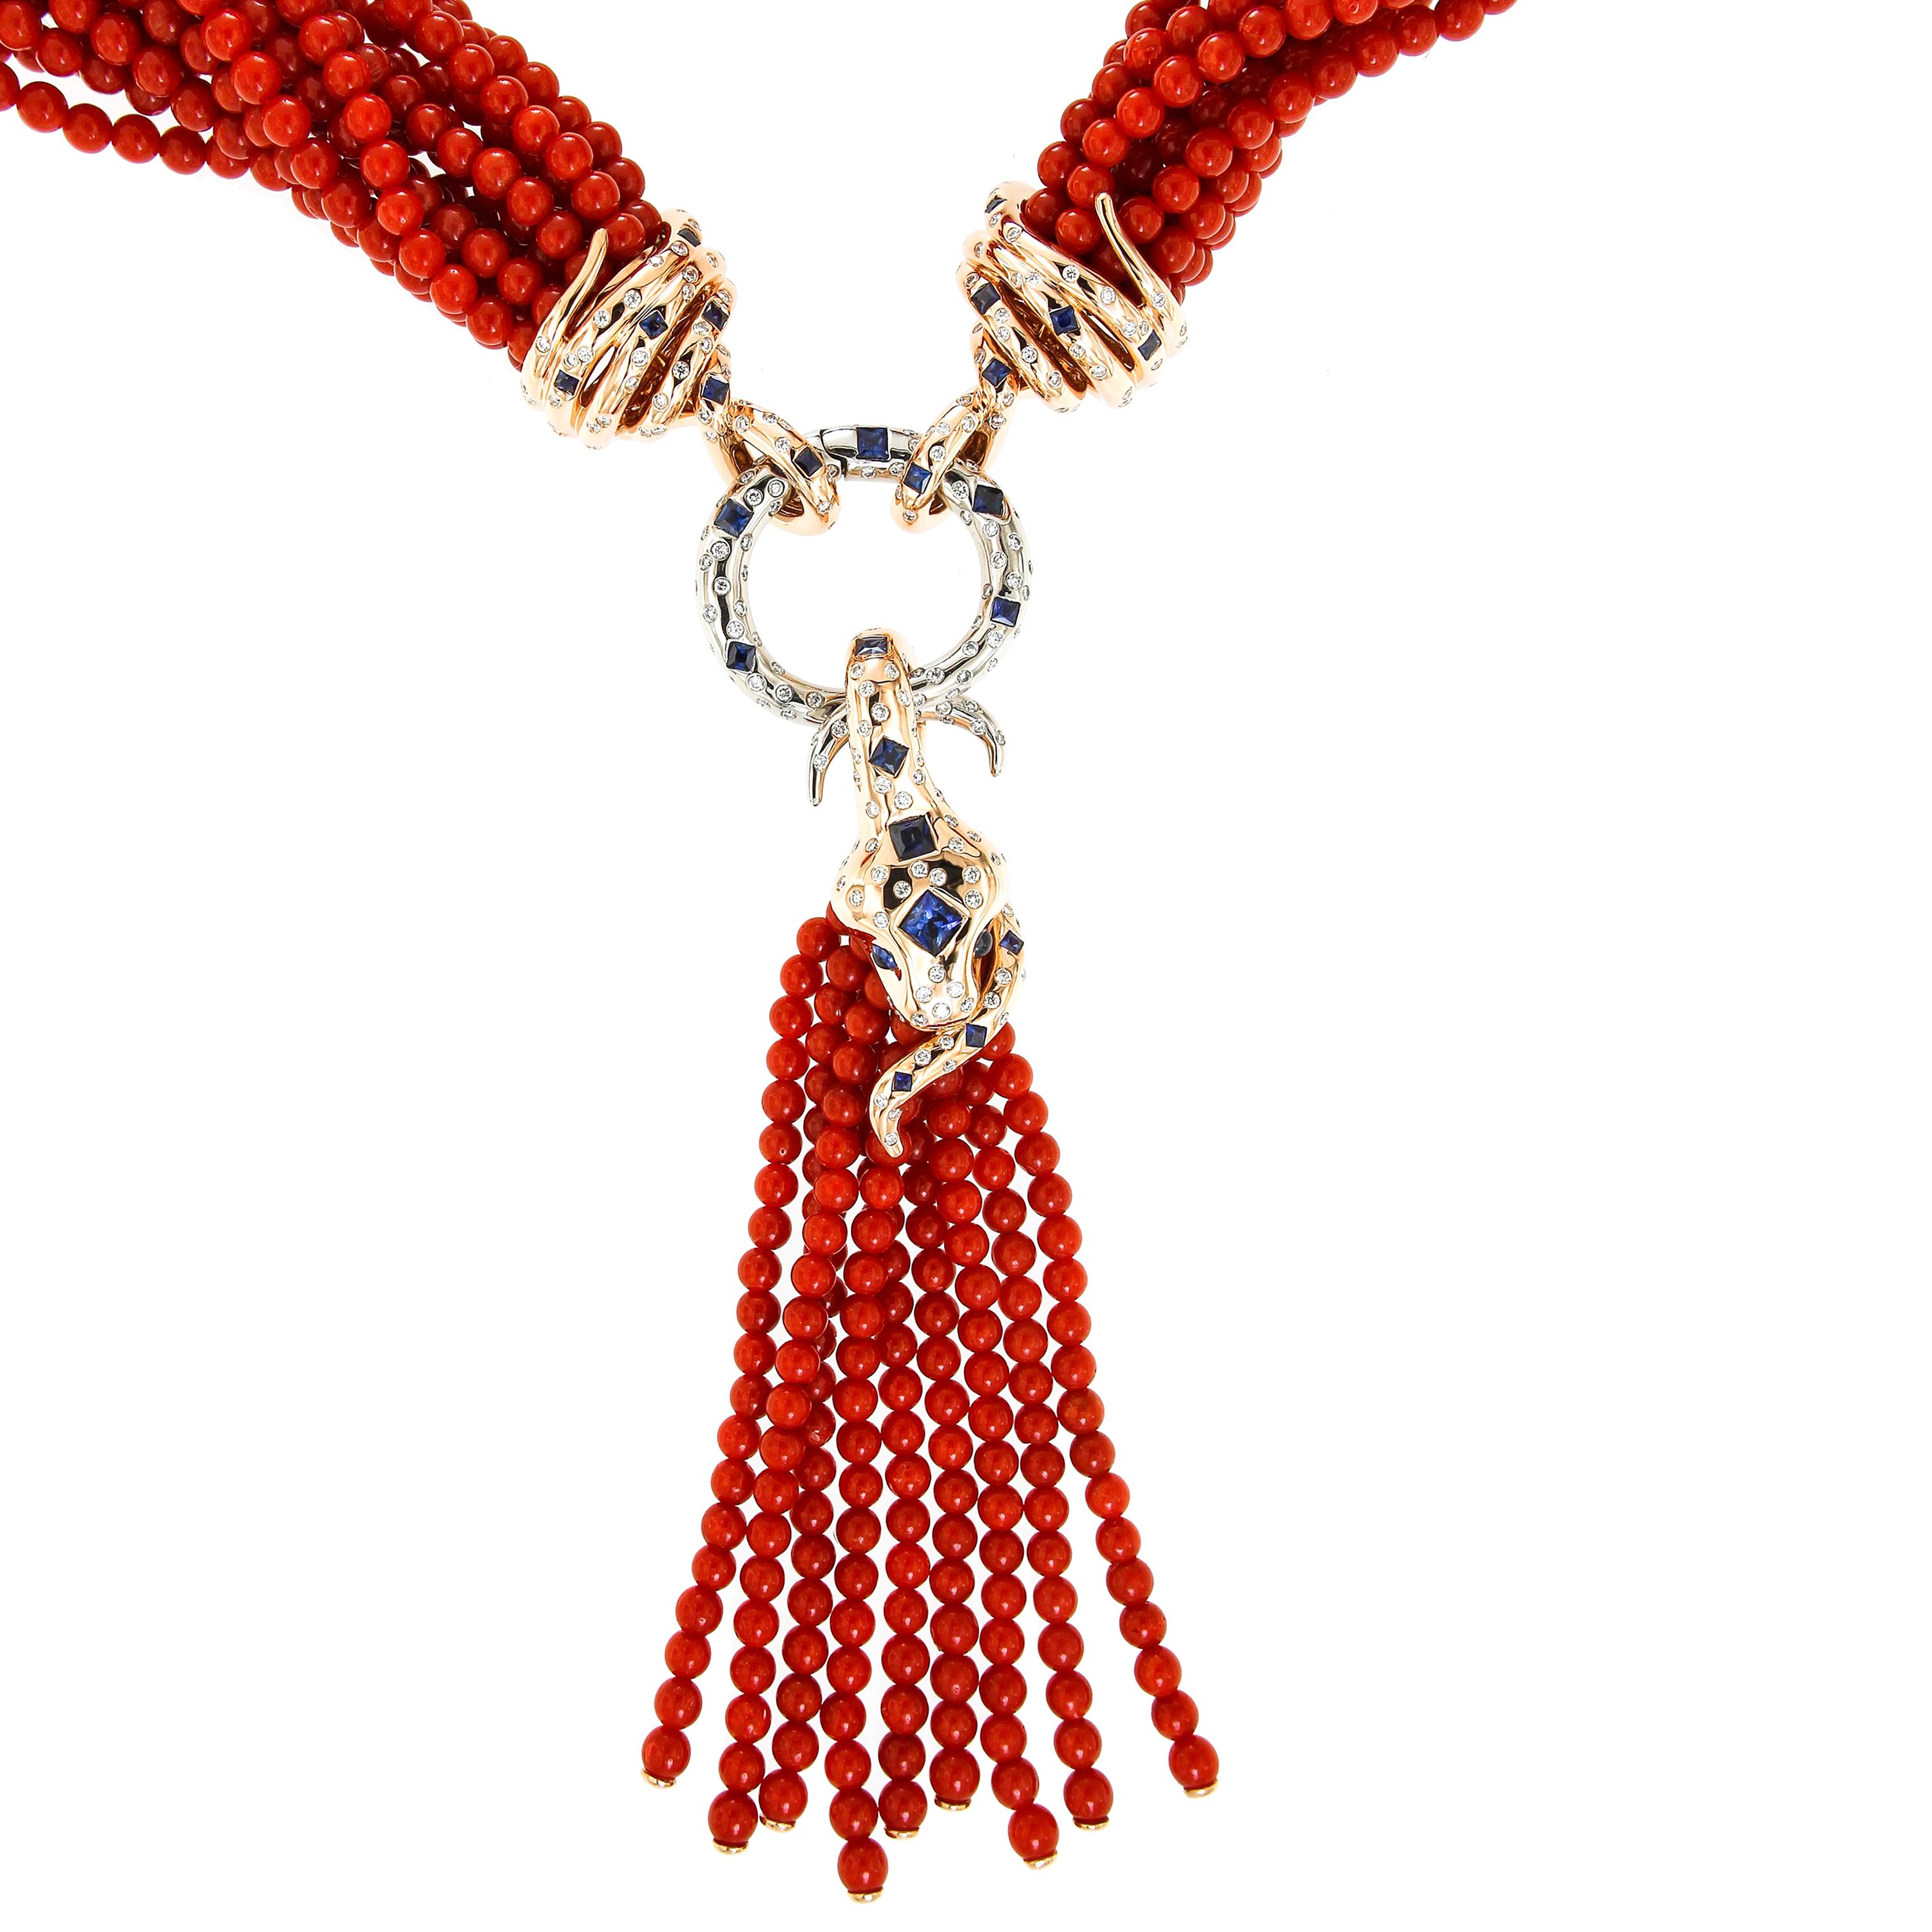 Designing this Necklace, we had the powerful women of the 21st century in mind. Female but independent, always elegant and sophisticated, yet with a relaxed style. More relaxed, does not mean less elegant.

The coral beads are arranged in a